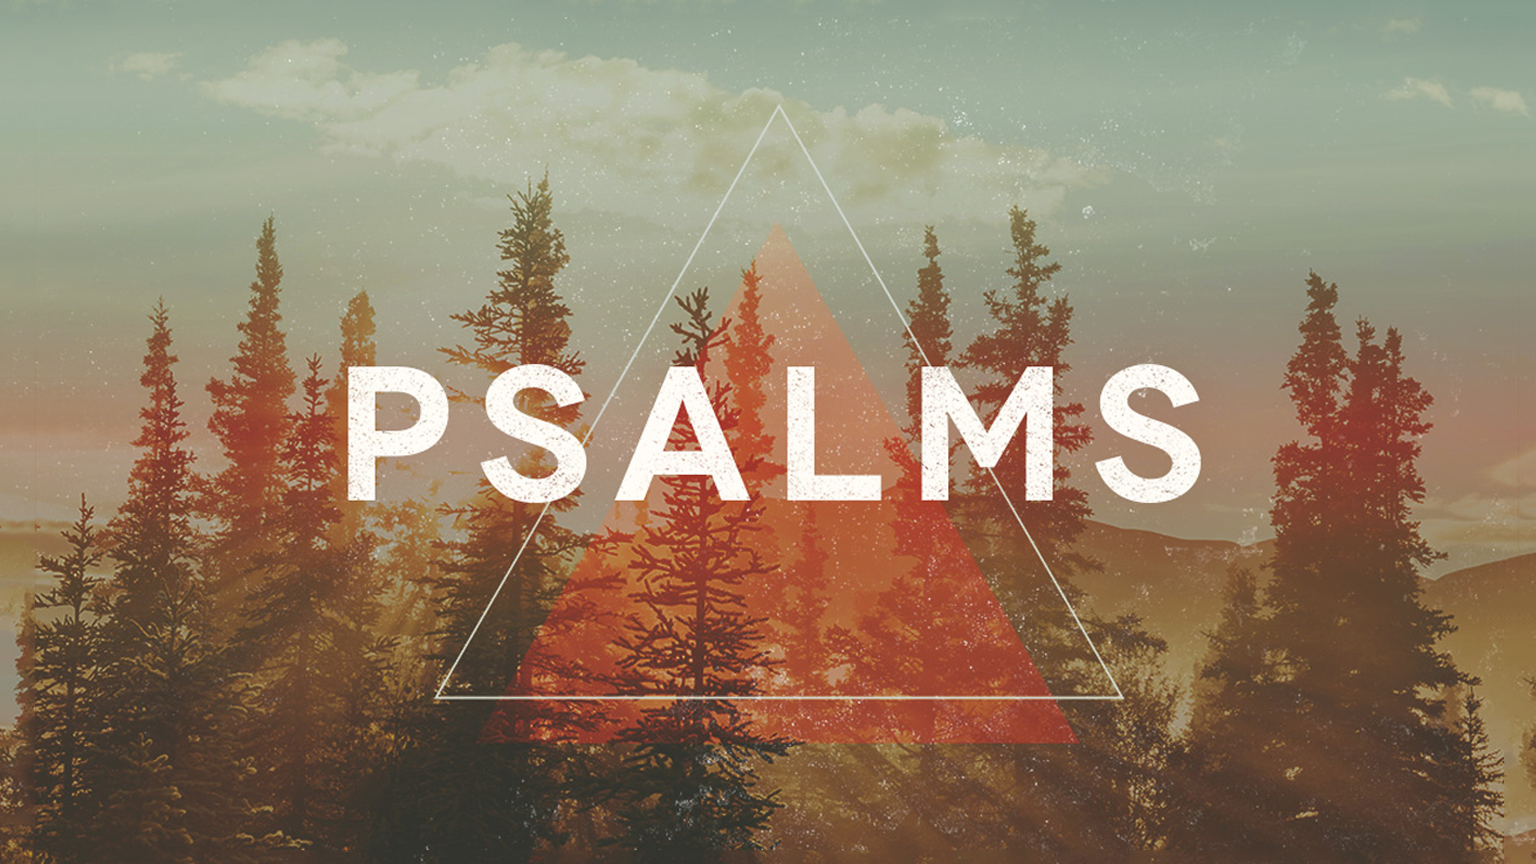 The Psalms banner